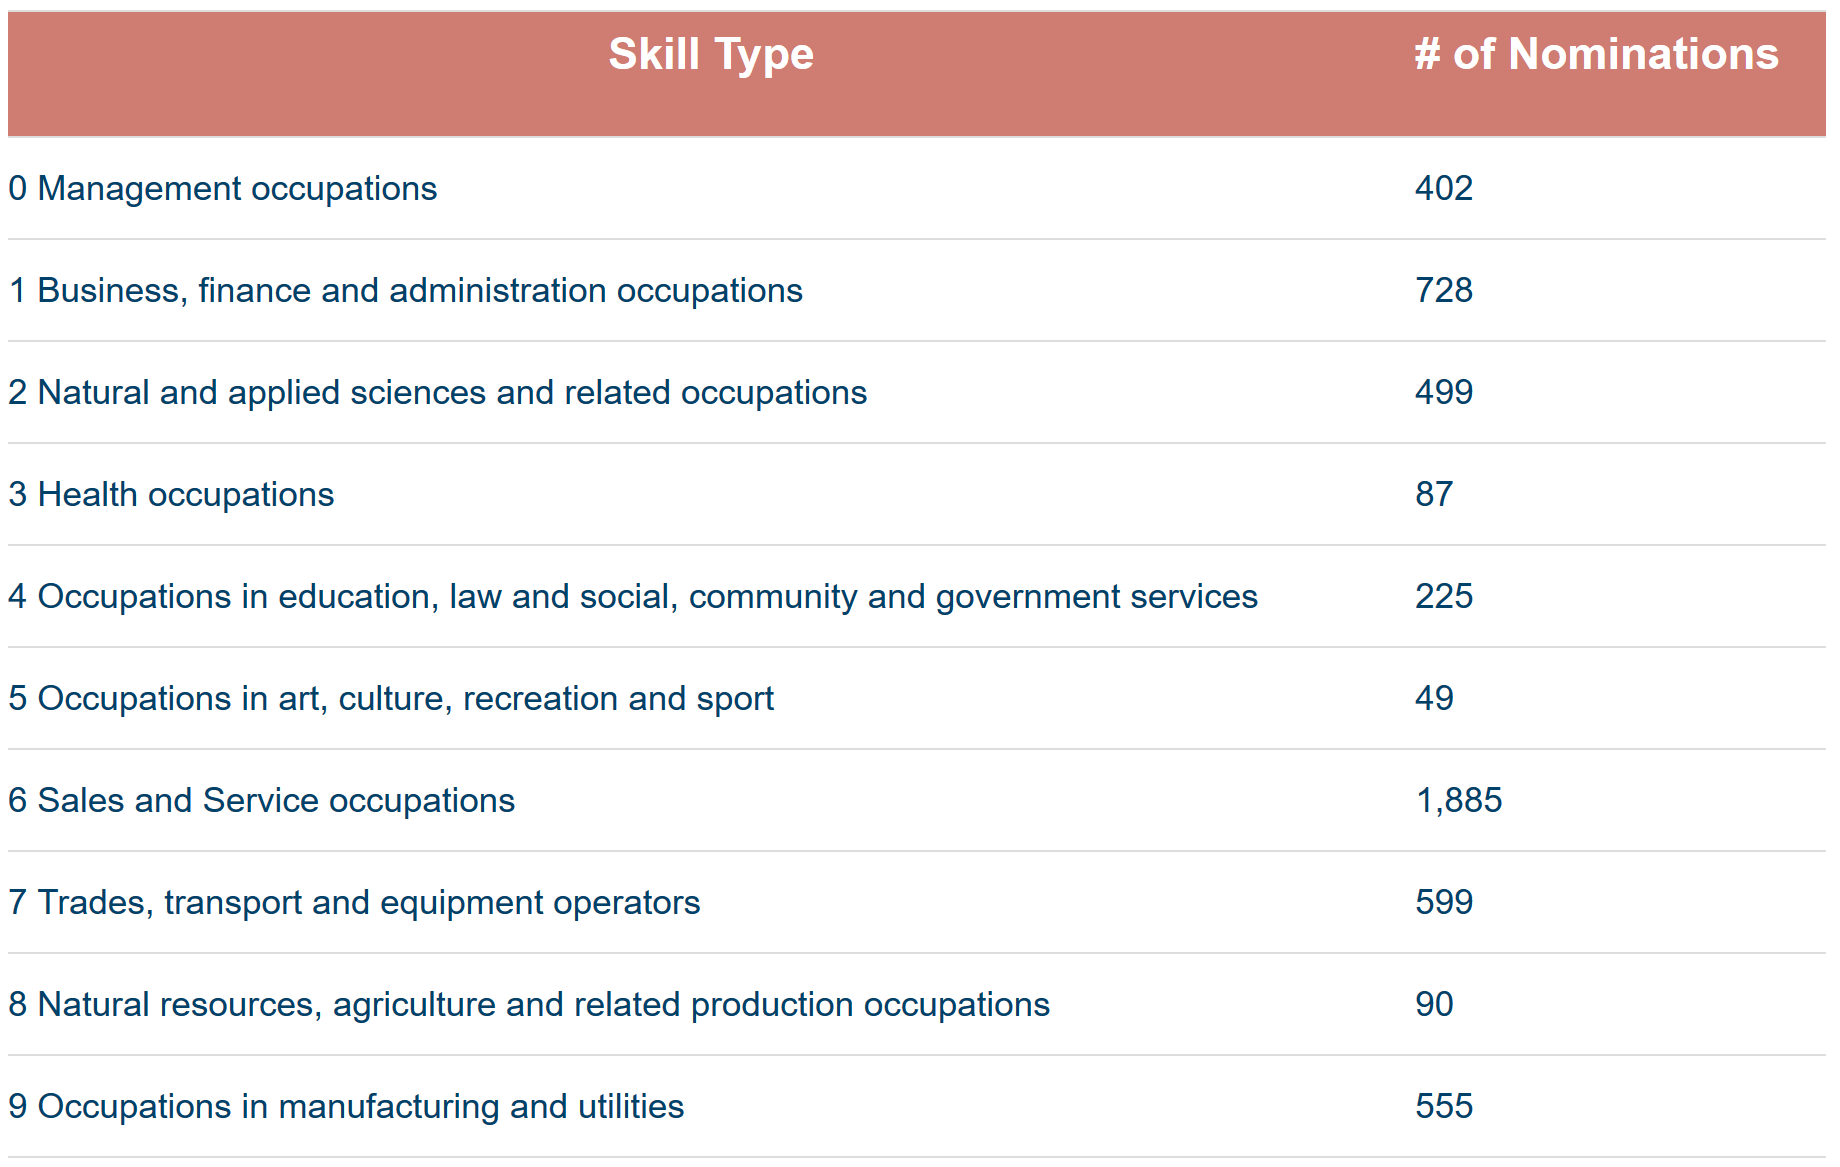 12 3 2019 2Nomination report by country occupations and skill levels are as follow